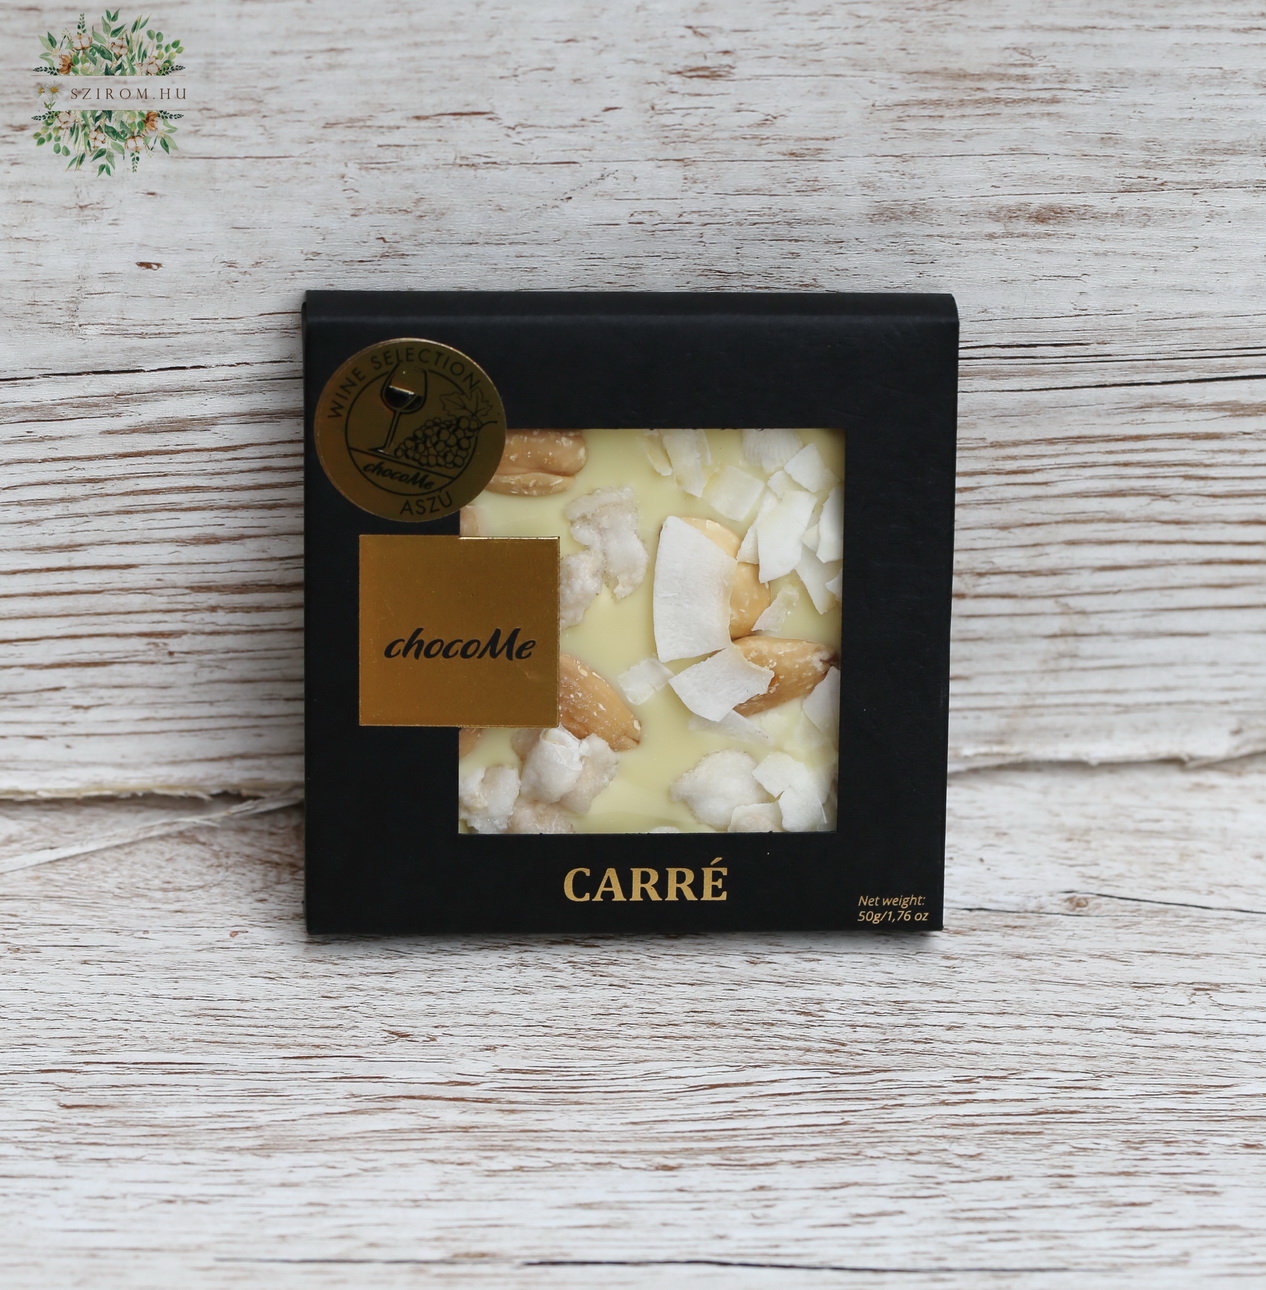 flower delivery Budapest - chocoMe handmade white chocolate 50g (candied jasmine petals, coconut shavings, Sicilian almonds)